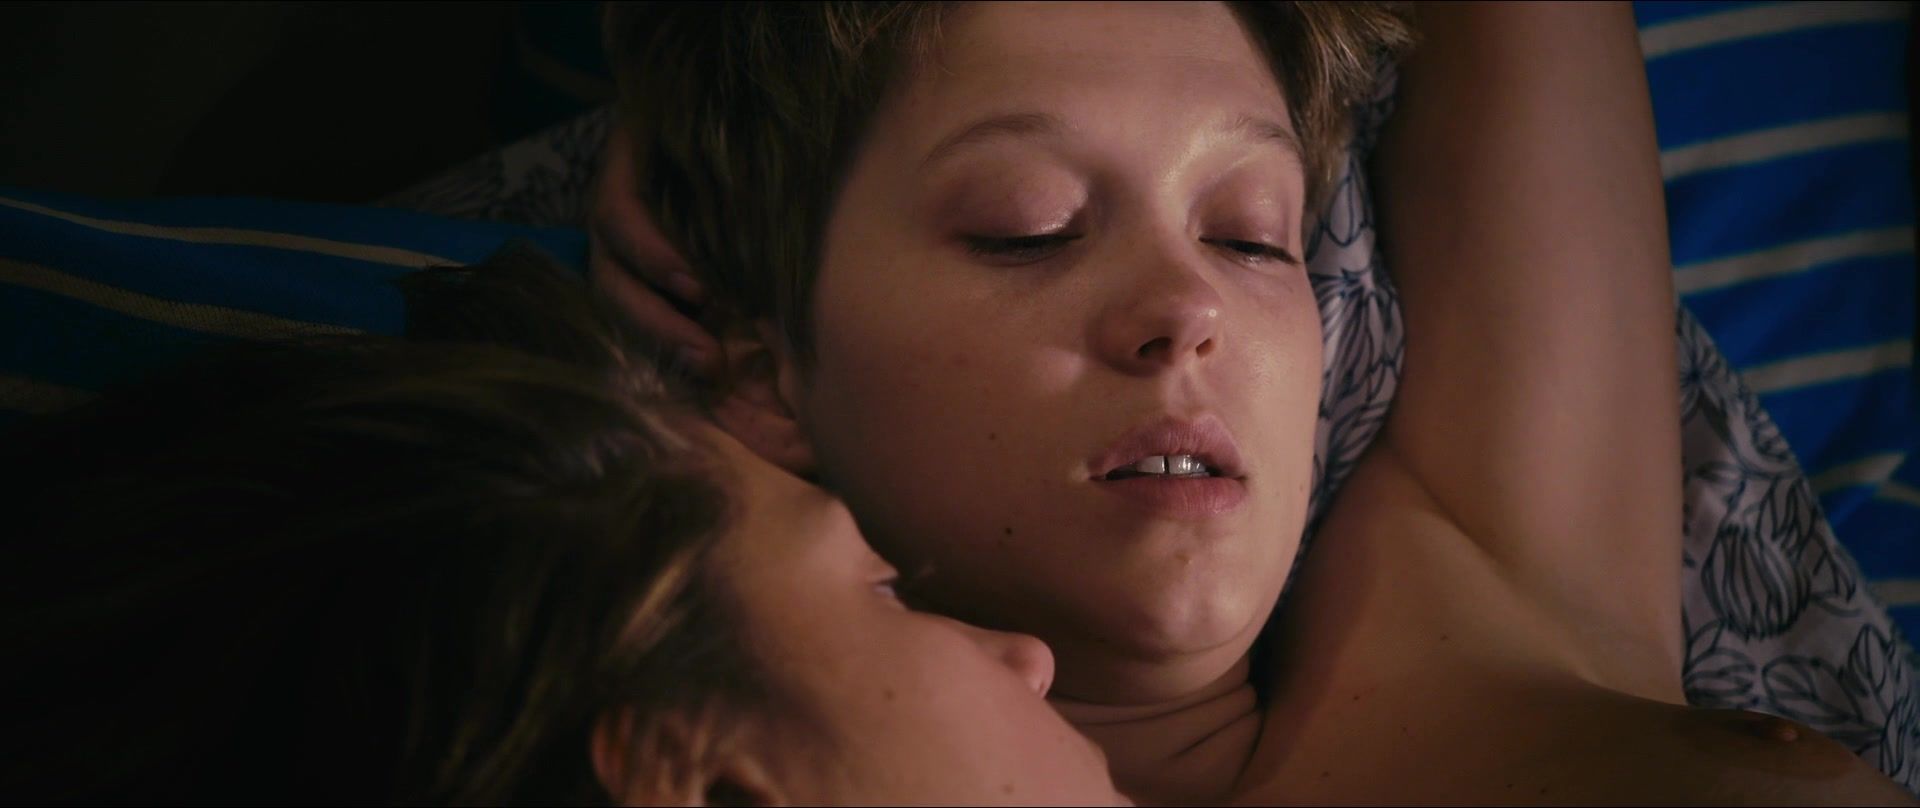 xHamster Adele Exarchopoulos & Léa Seydoux - Blue Is The Warmest Color (2013) Blond - 1